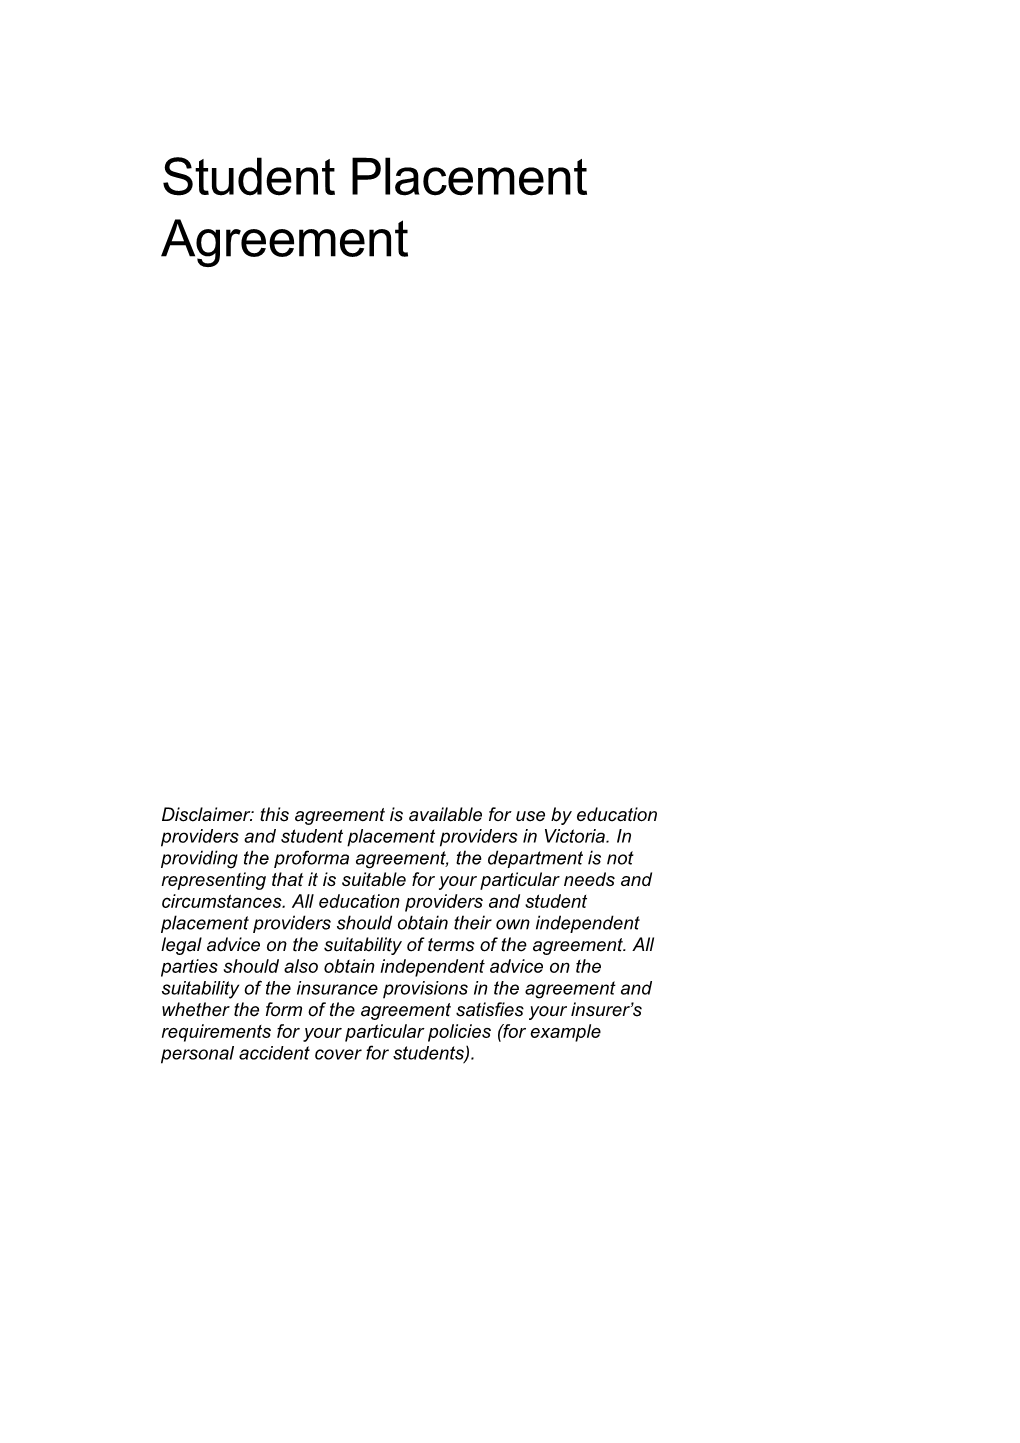 Student Placement Agreement